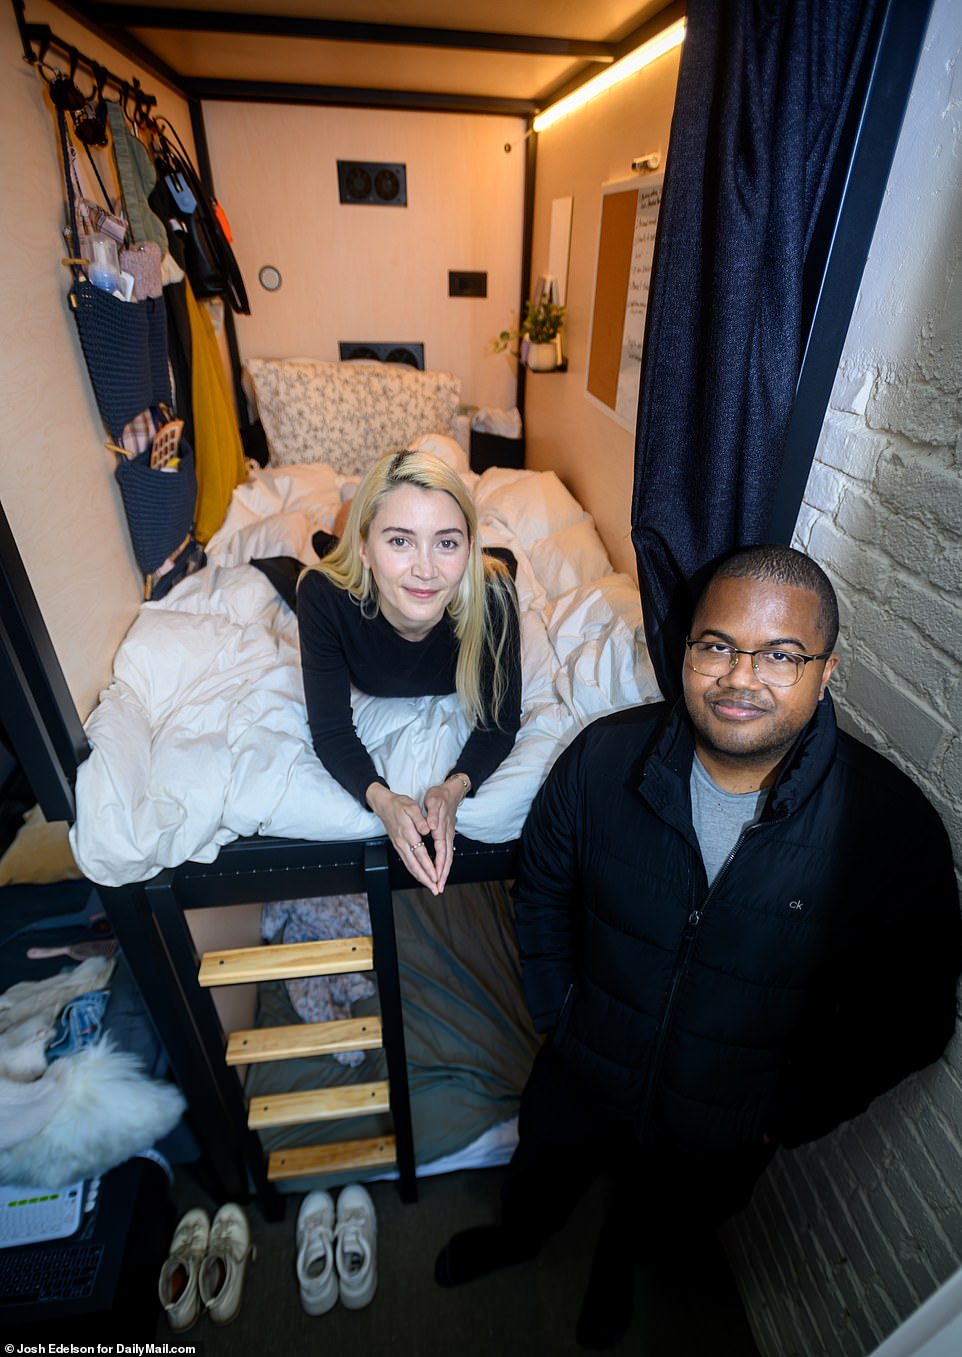 EXCLUSIVE: Brownstone Shared Housing’s San Francisco sleeping pod complex receives surprise visit from city inspectors over possible code violations